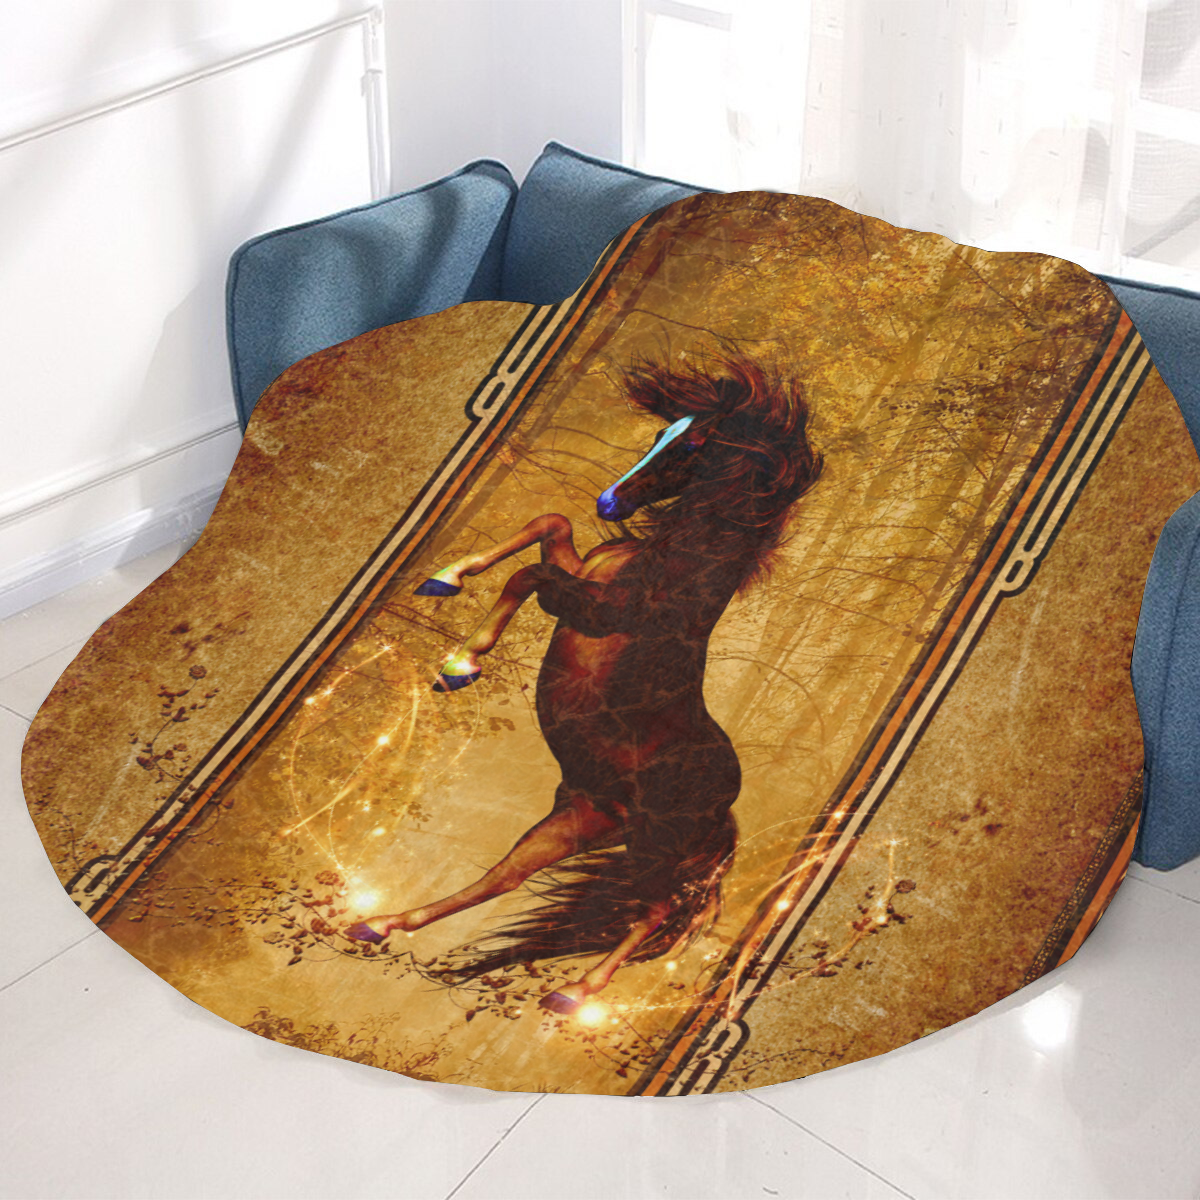 Awesome horse, vintage background Circular Ultra-Soft Micro Fleece Blanket 60"